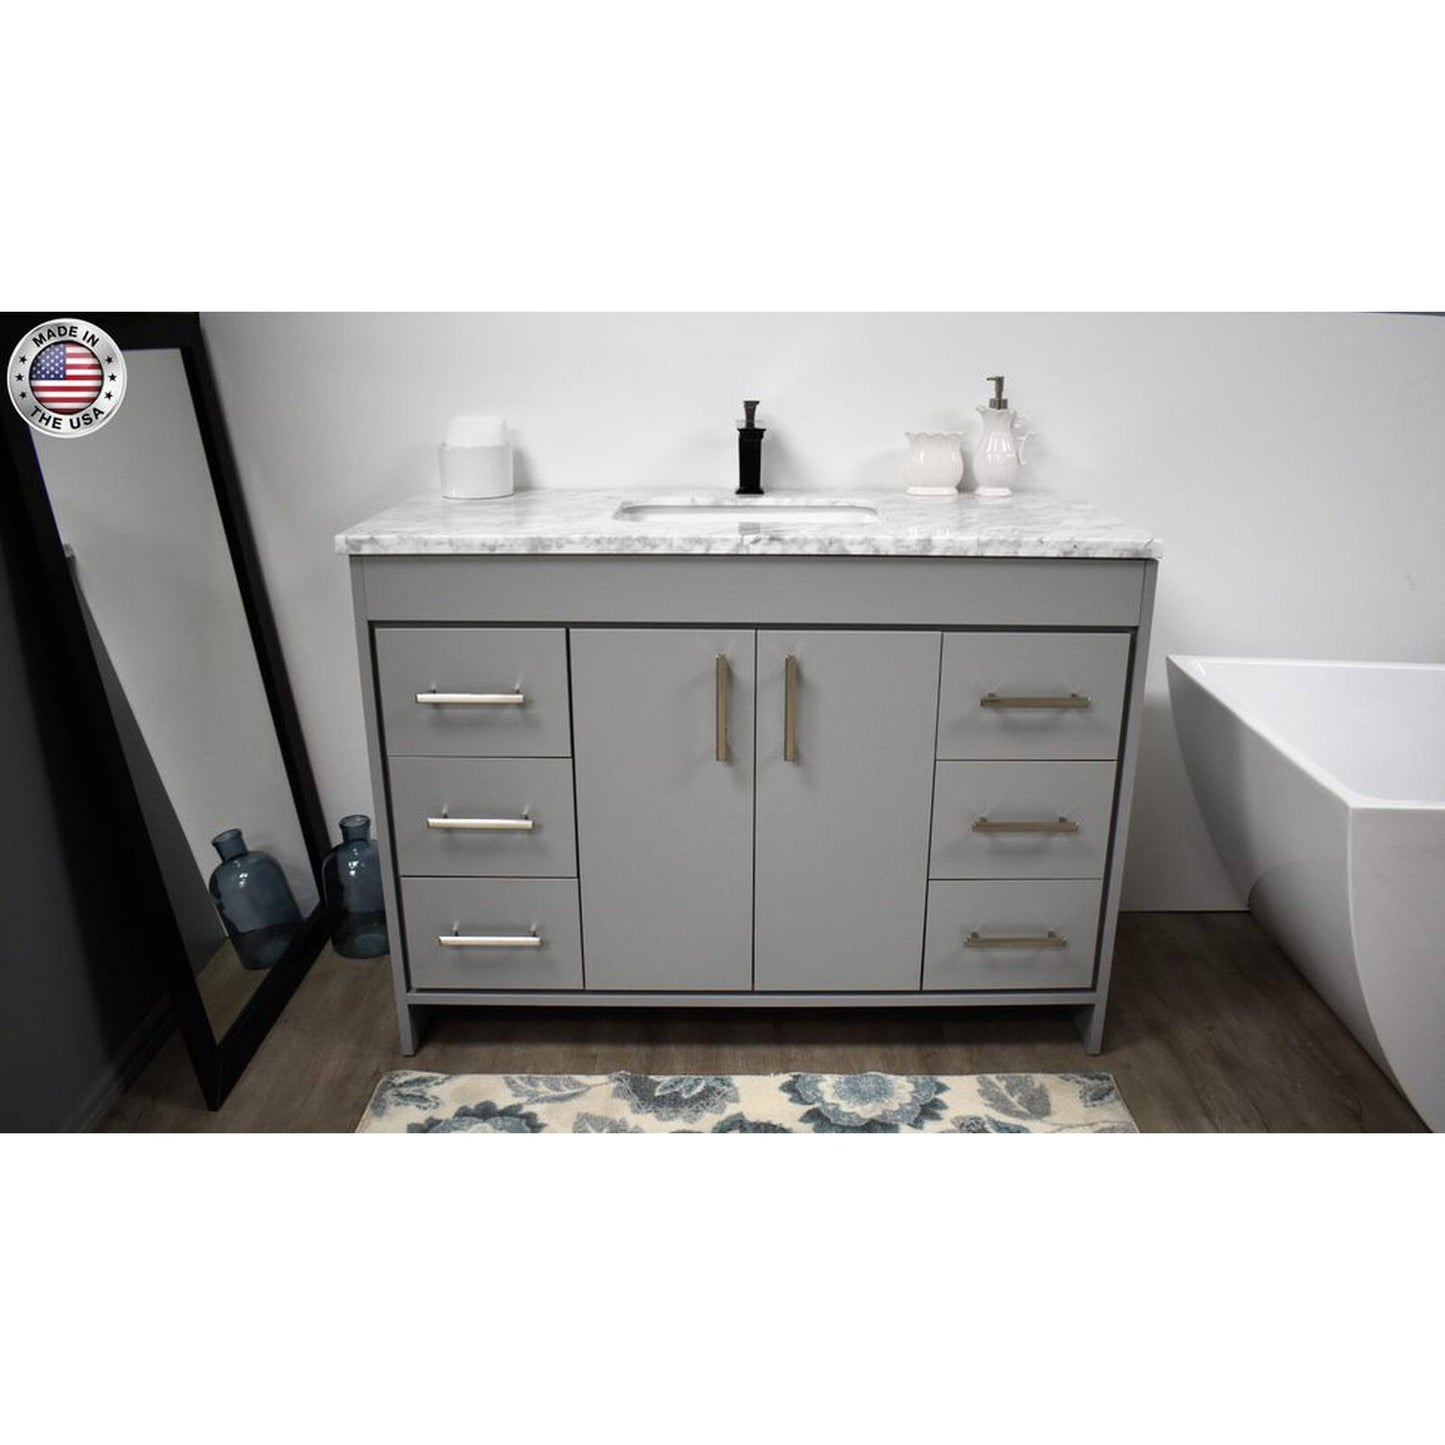 Volpa USA Capri 48" x 22" Gray Freestanding Modern Bathroom Vanity With Preinstalled Undermount Sink And Carrara Marble top With Brushed Nickel Edge Handles